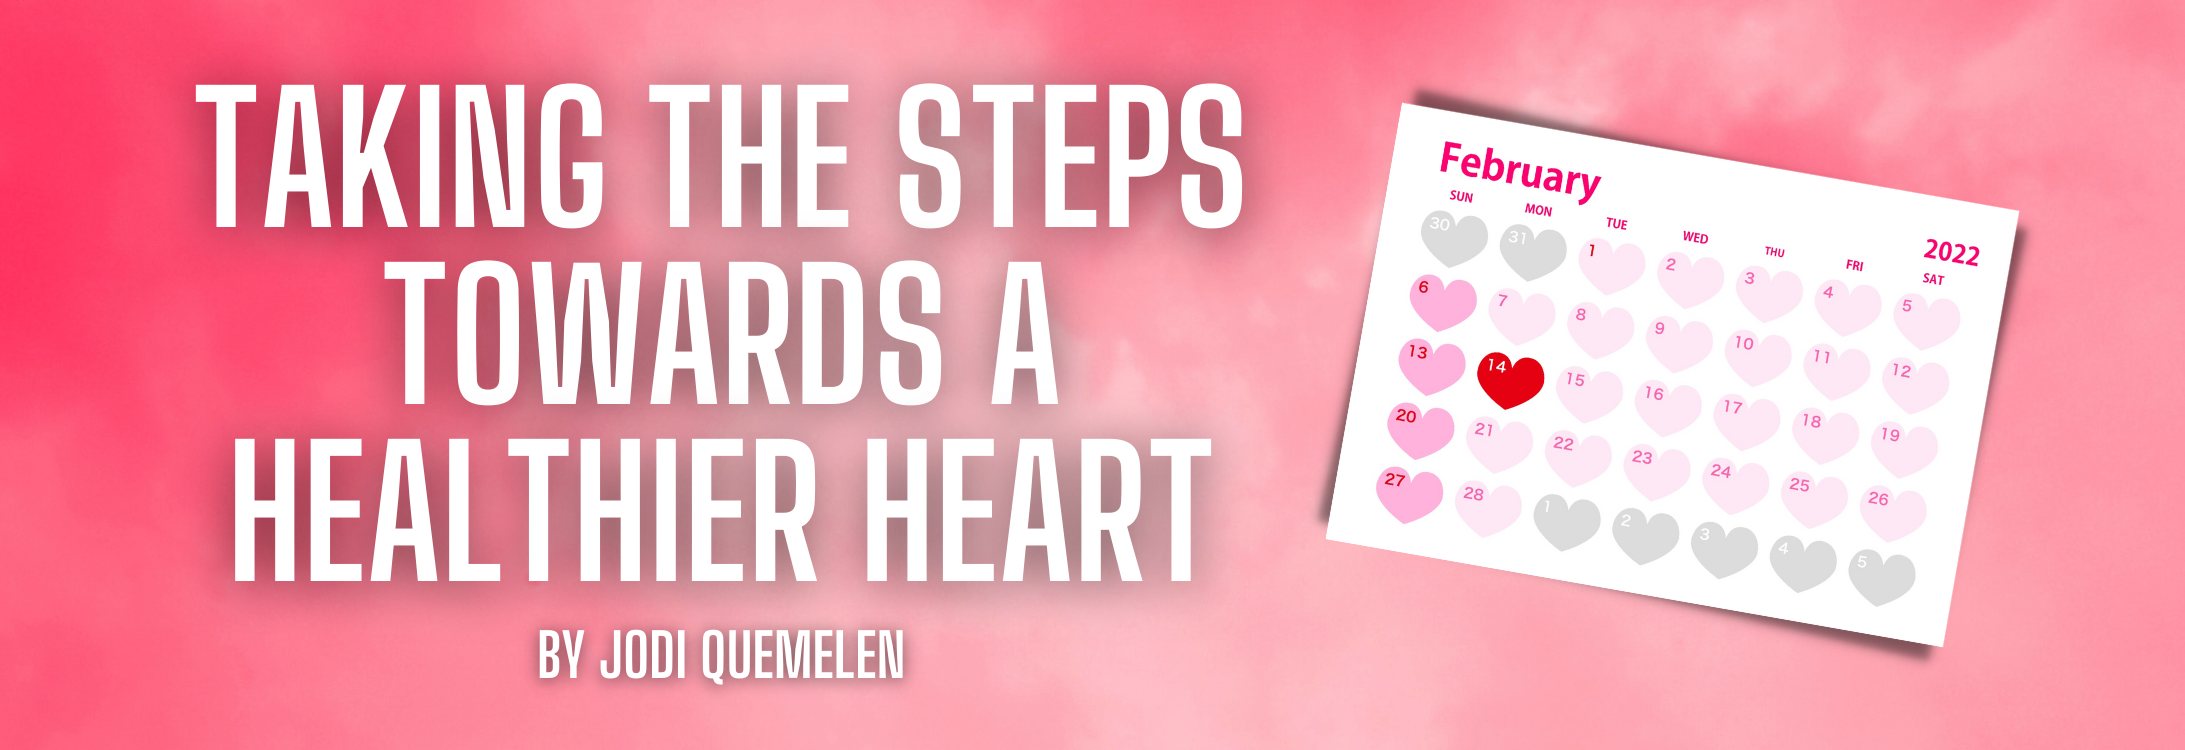 Taking the Steps Towards a Healthier Heart blog cover